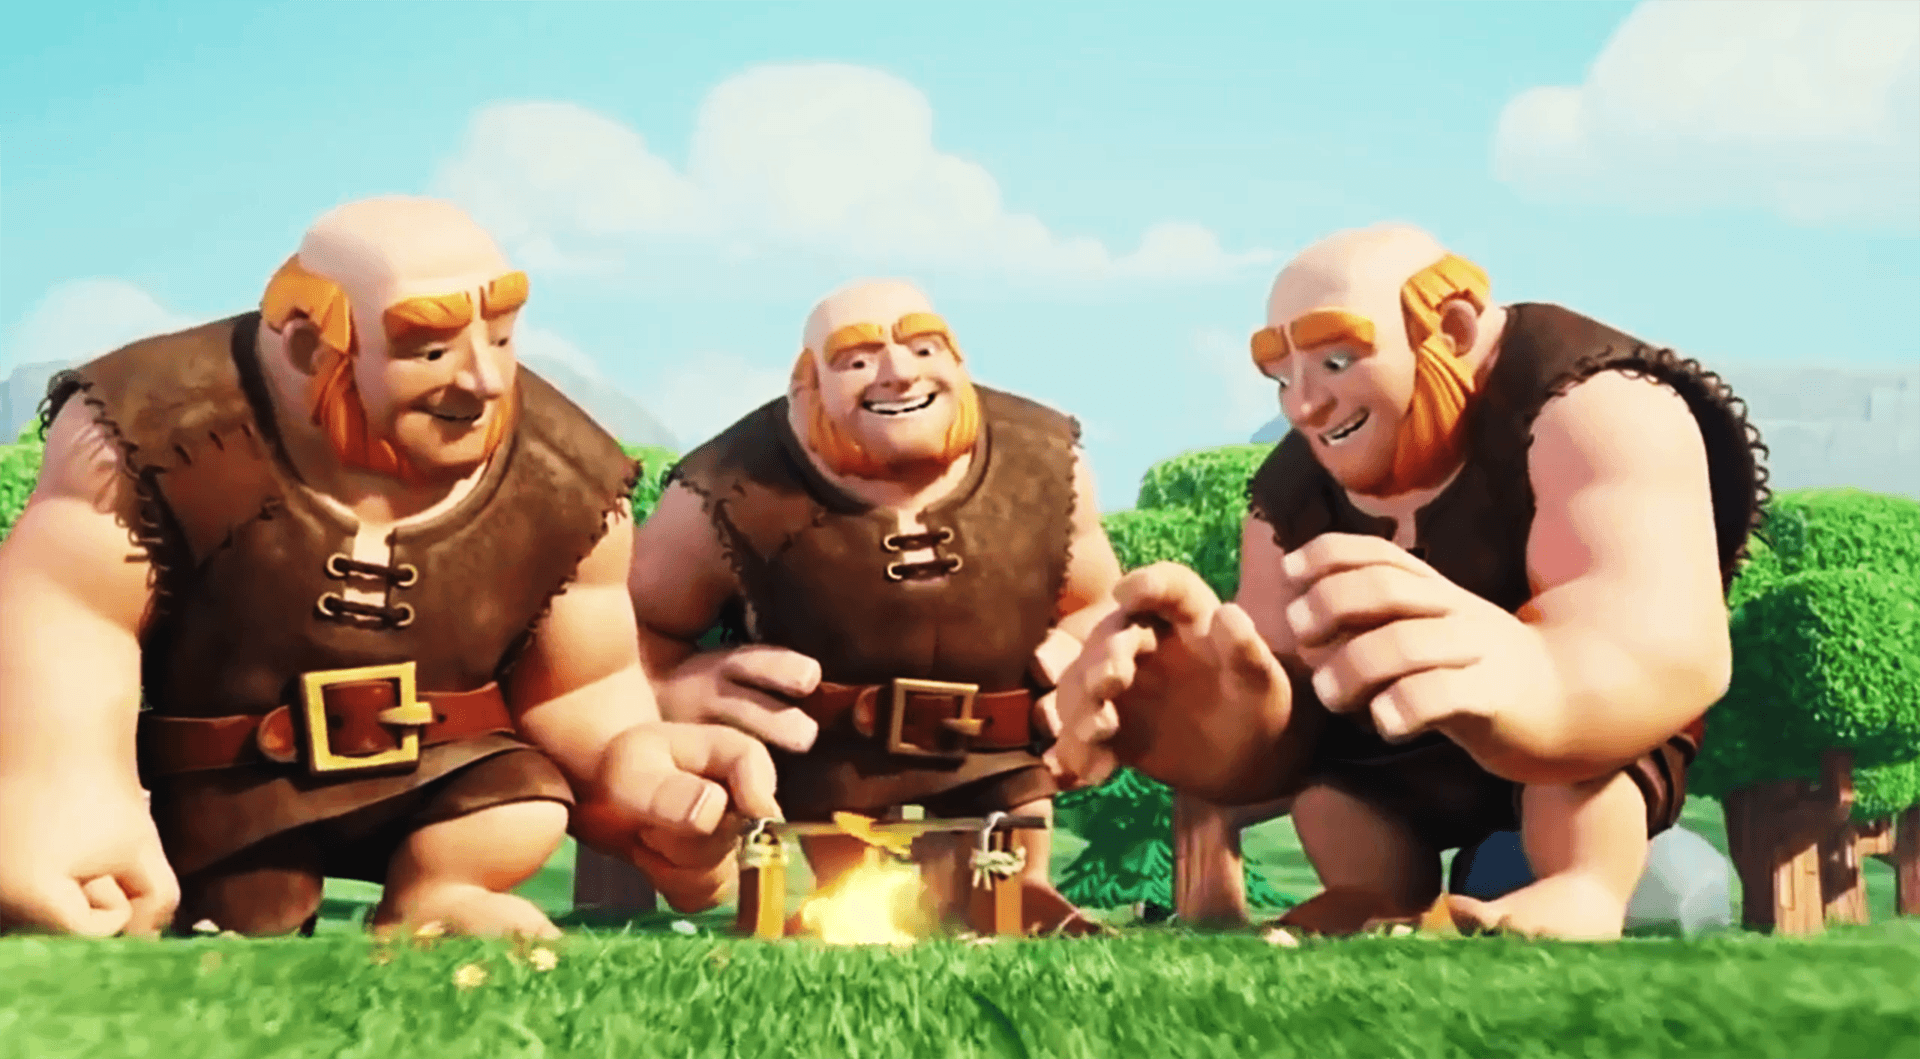 giant clash of clans wallpapers wallpaper cave on giant clash of clans wallpapers